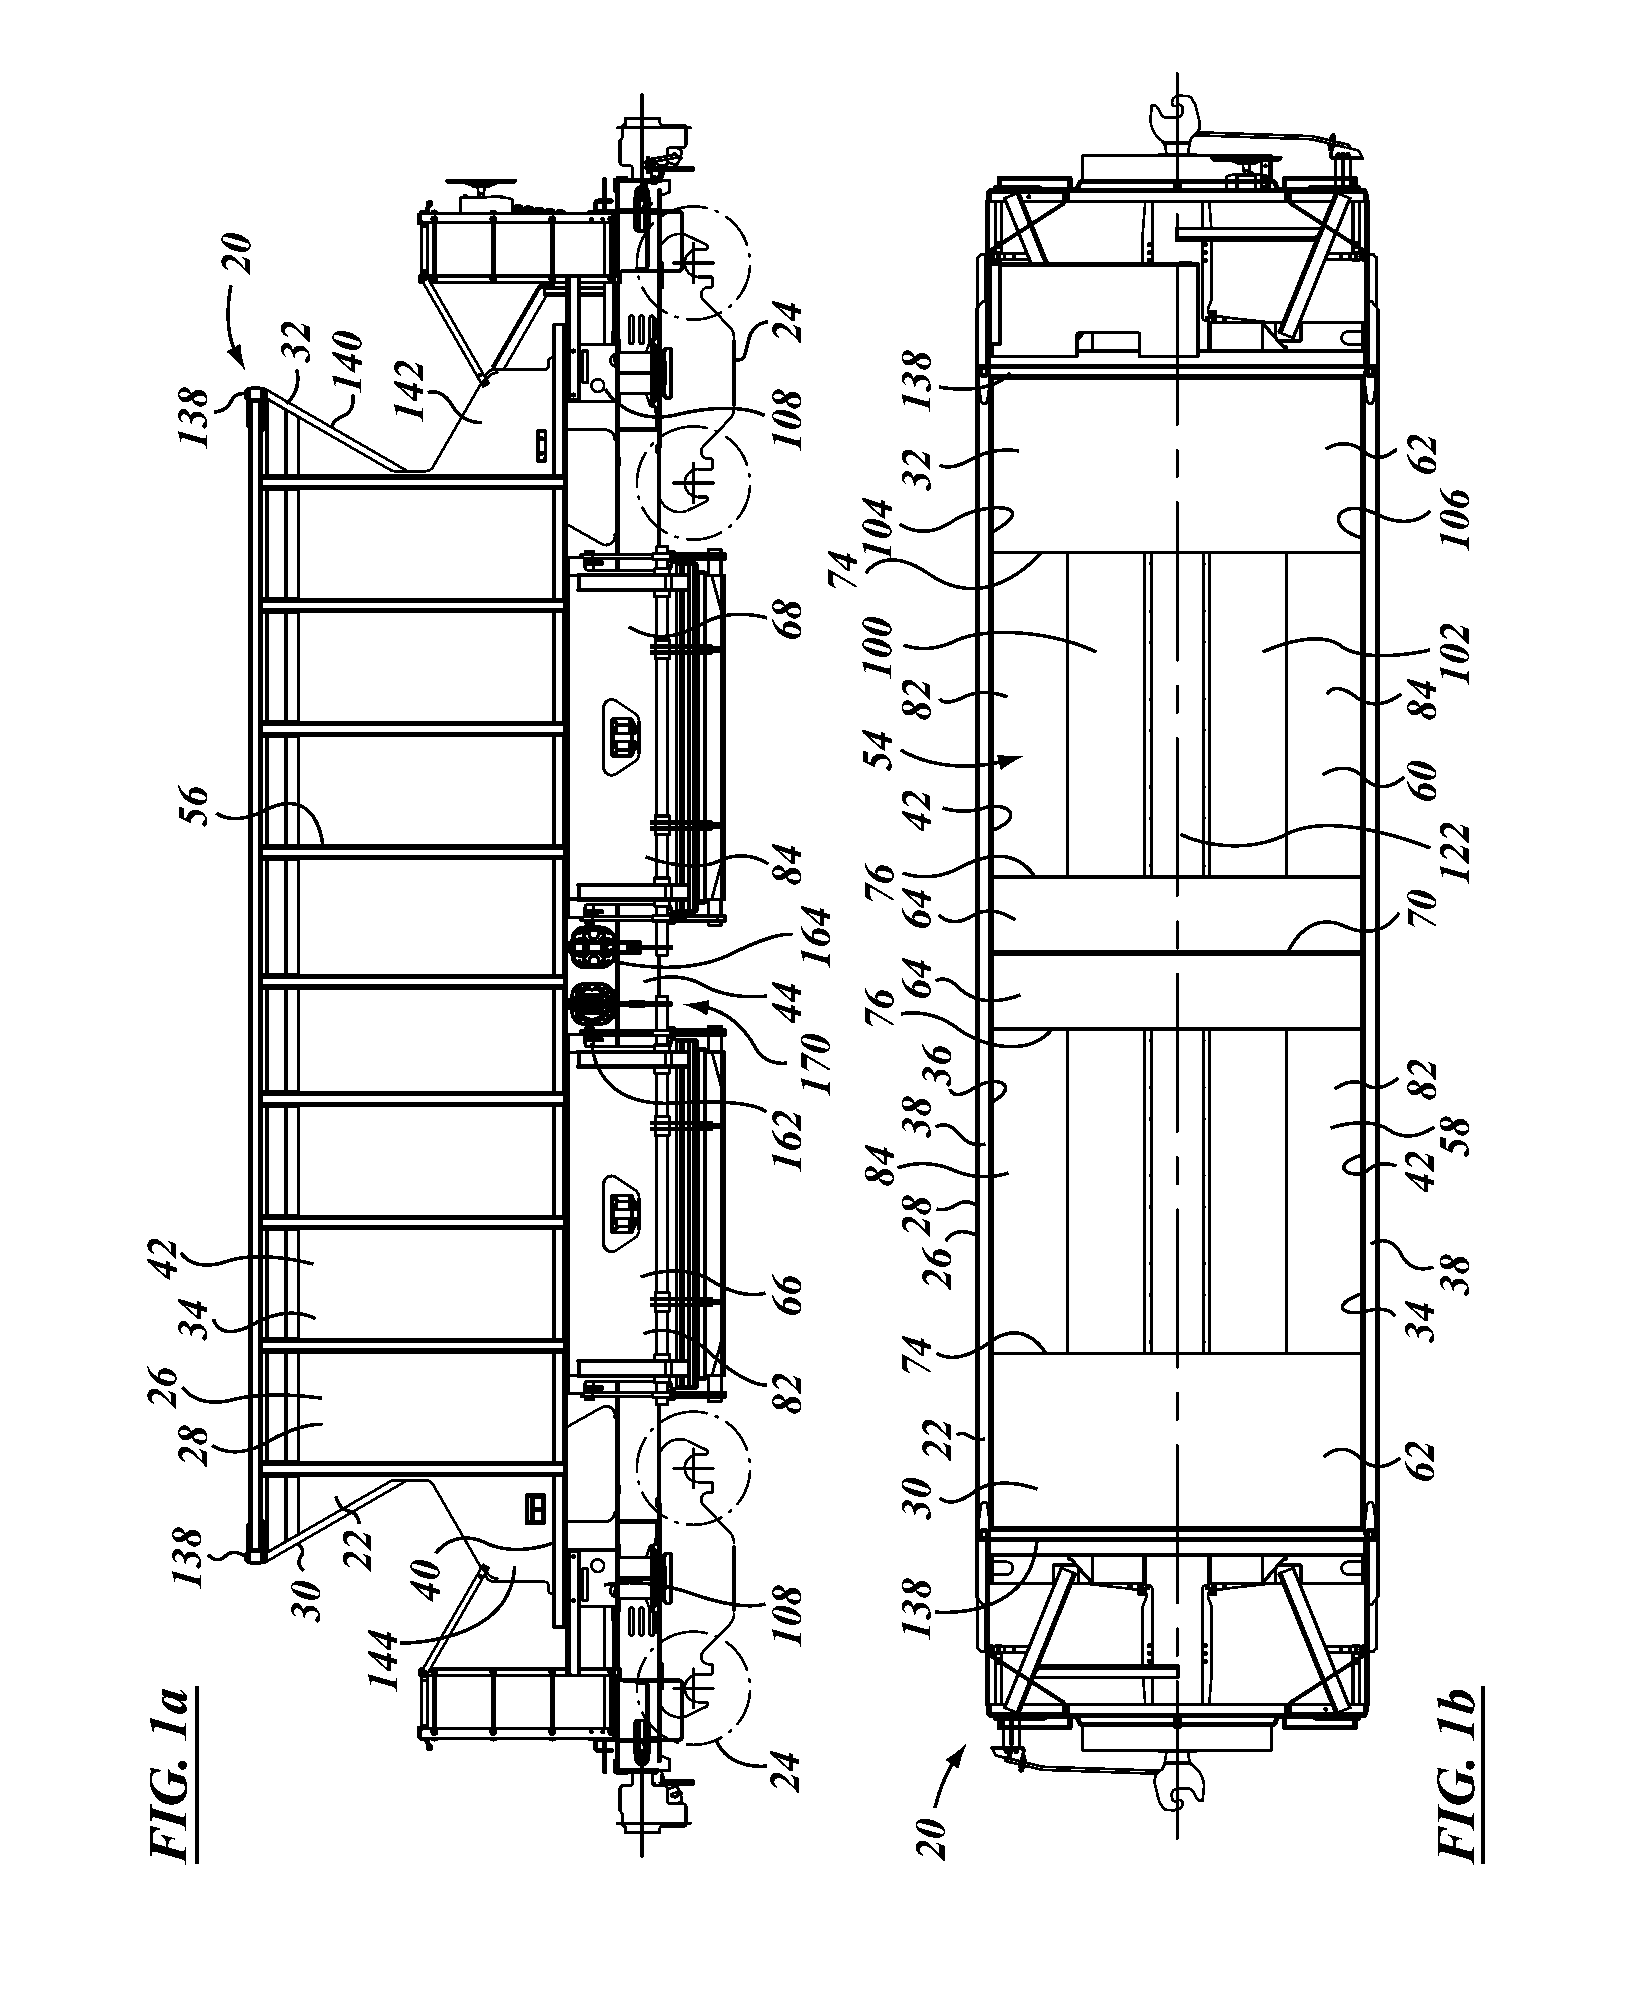 Railroad car and door mechanism therefor